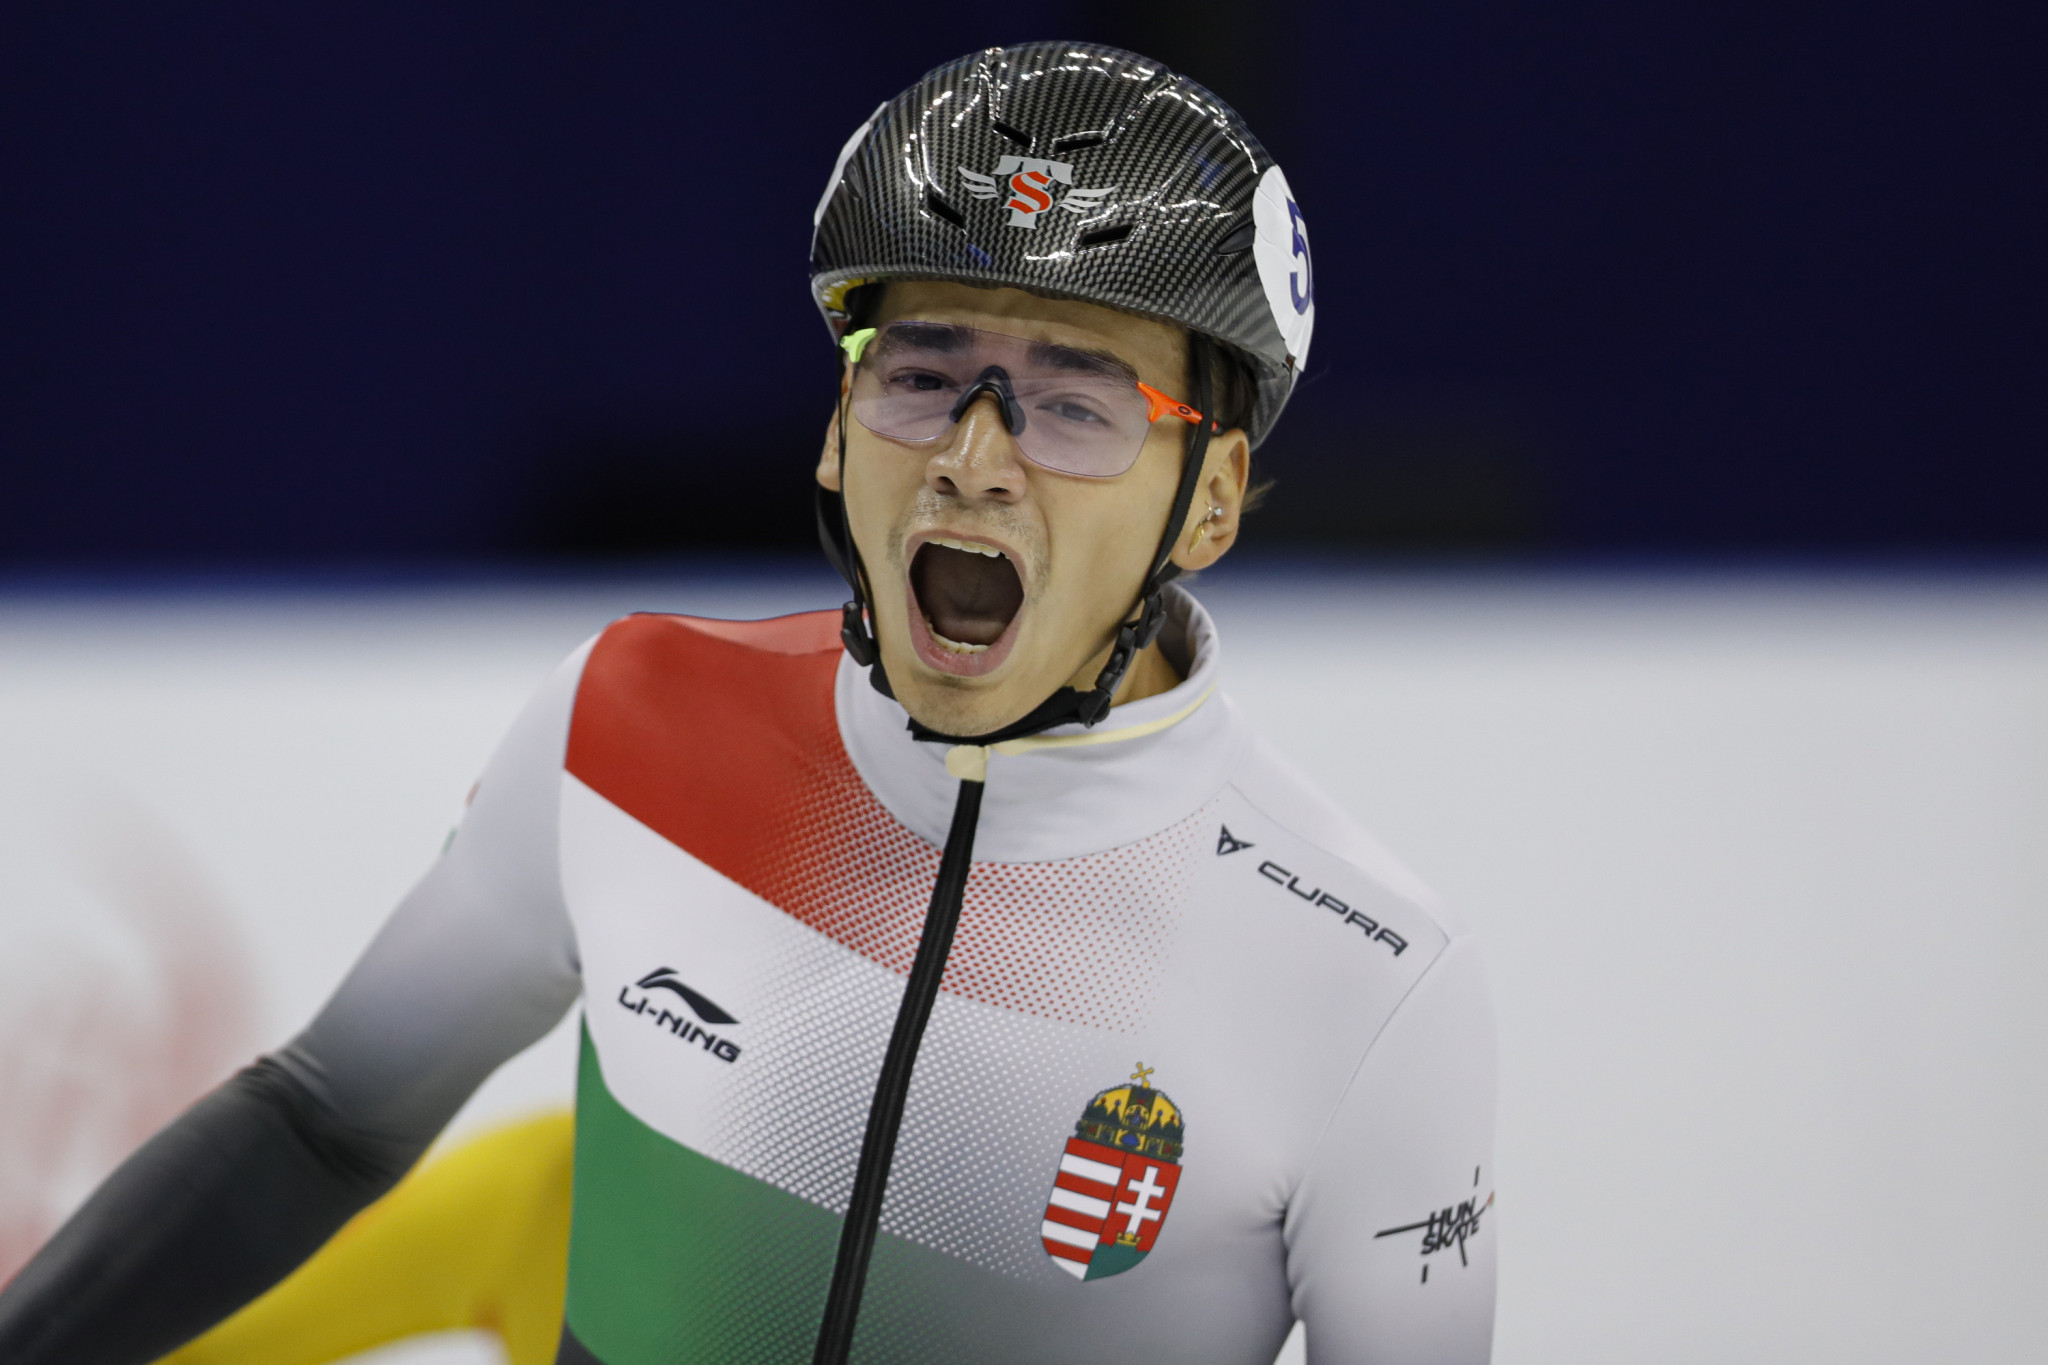 Hungary's Shaolin Sándor Liu clinched his second win of the season in the men's 500m ©Getty Images